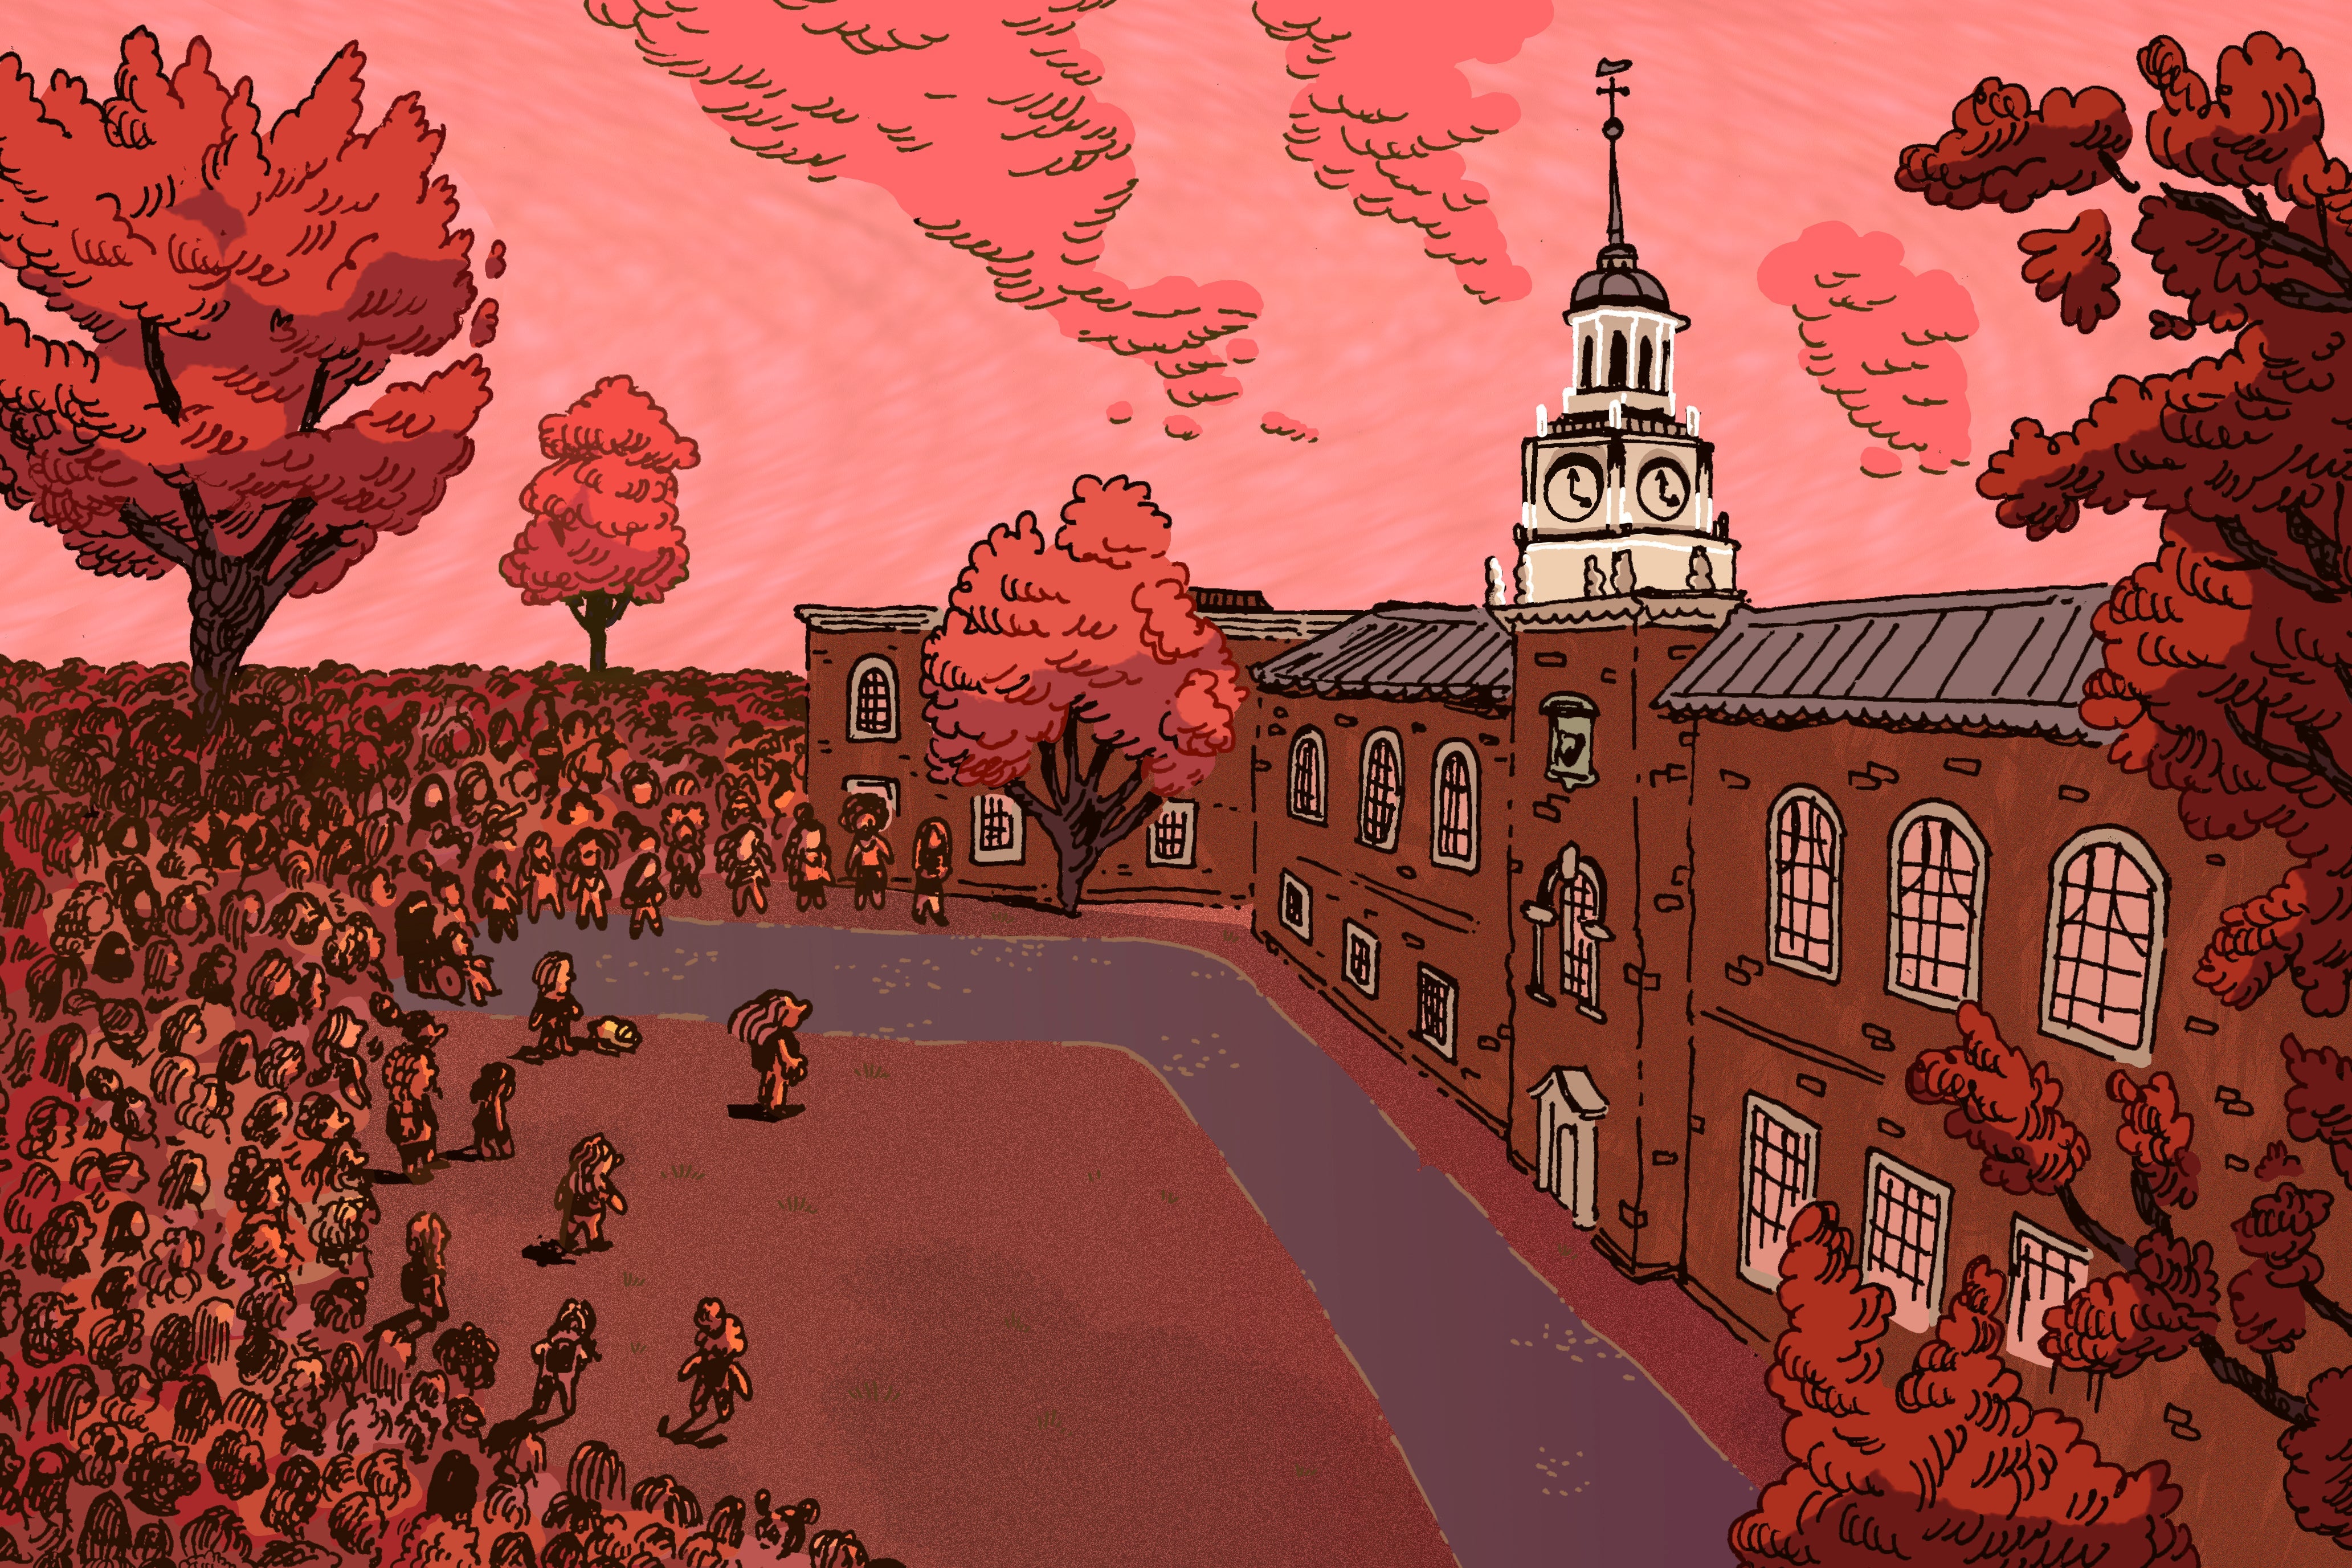 An illustration of a crowd of women on Dartmouth's campus.